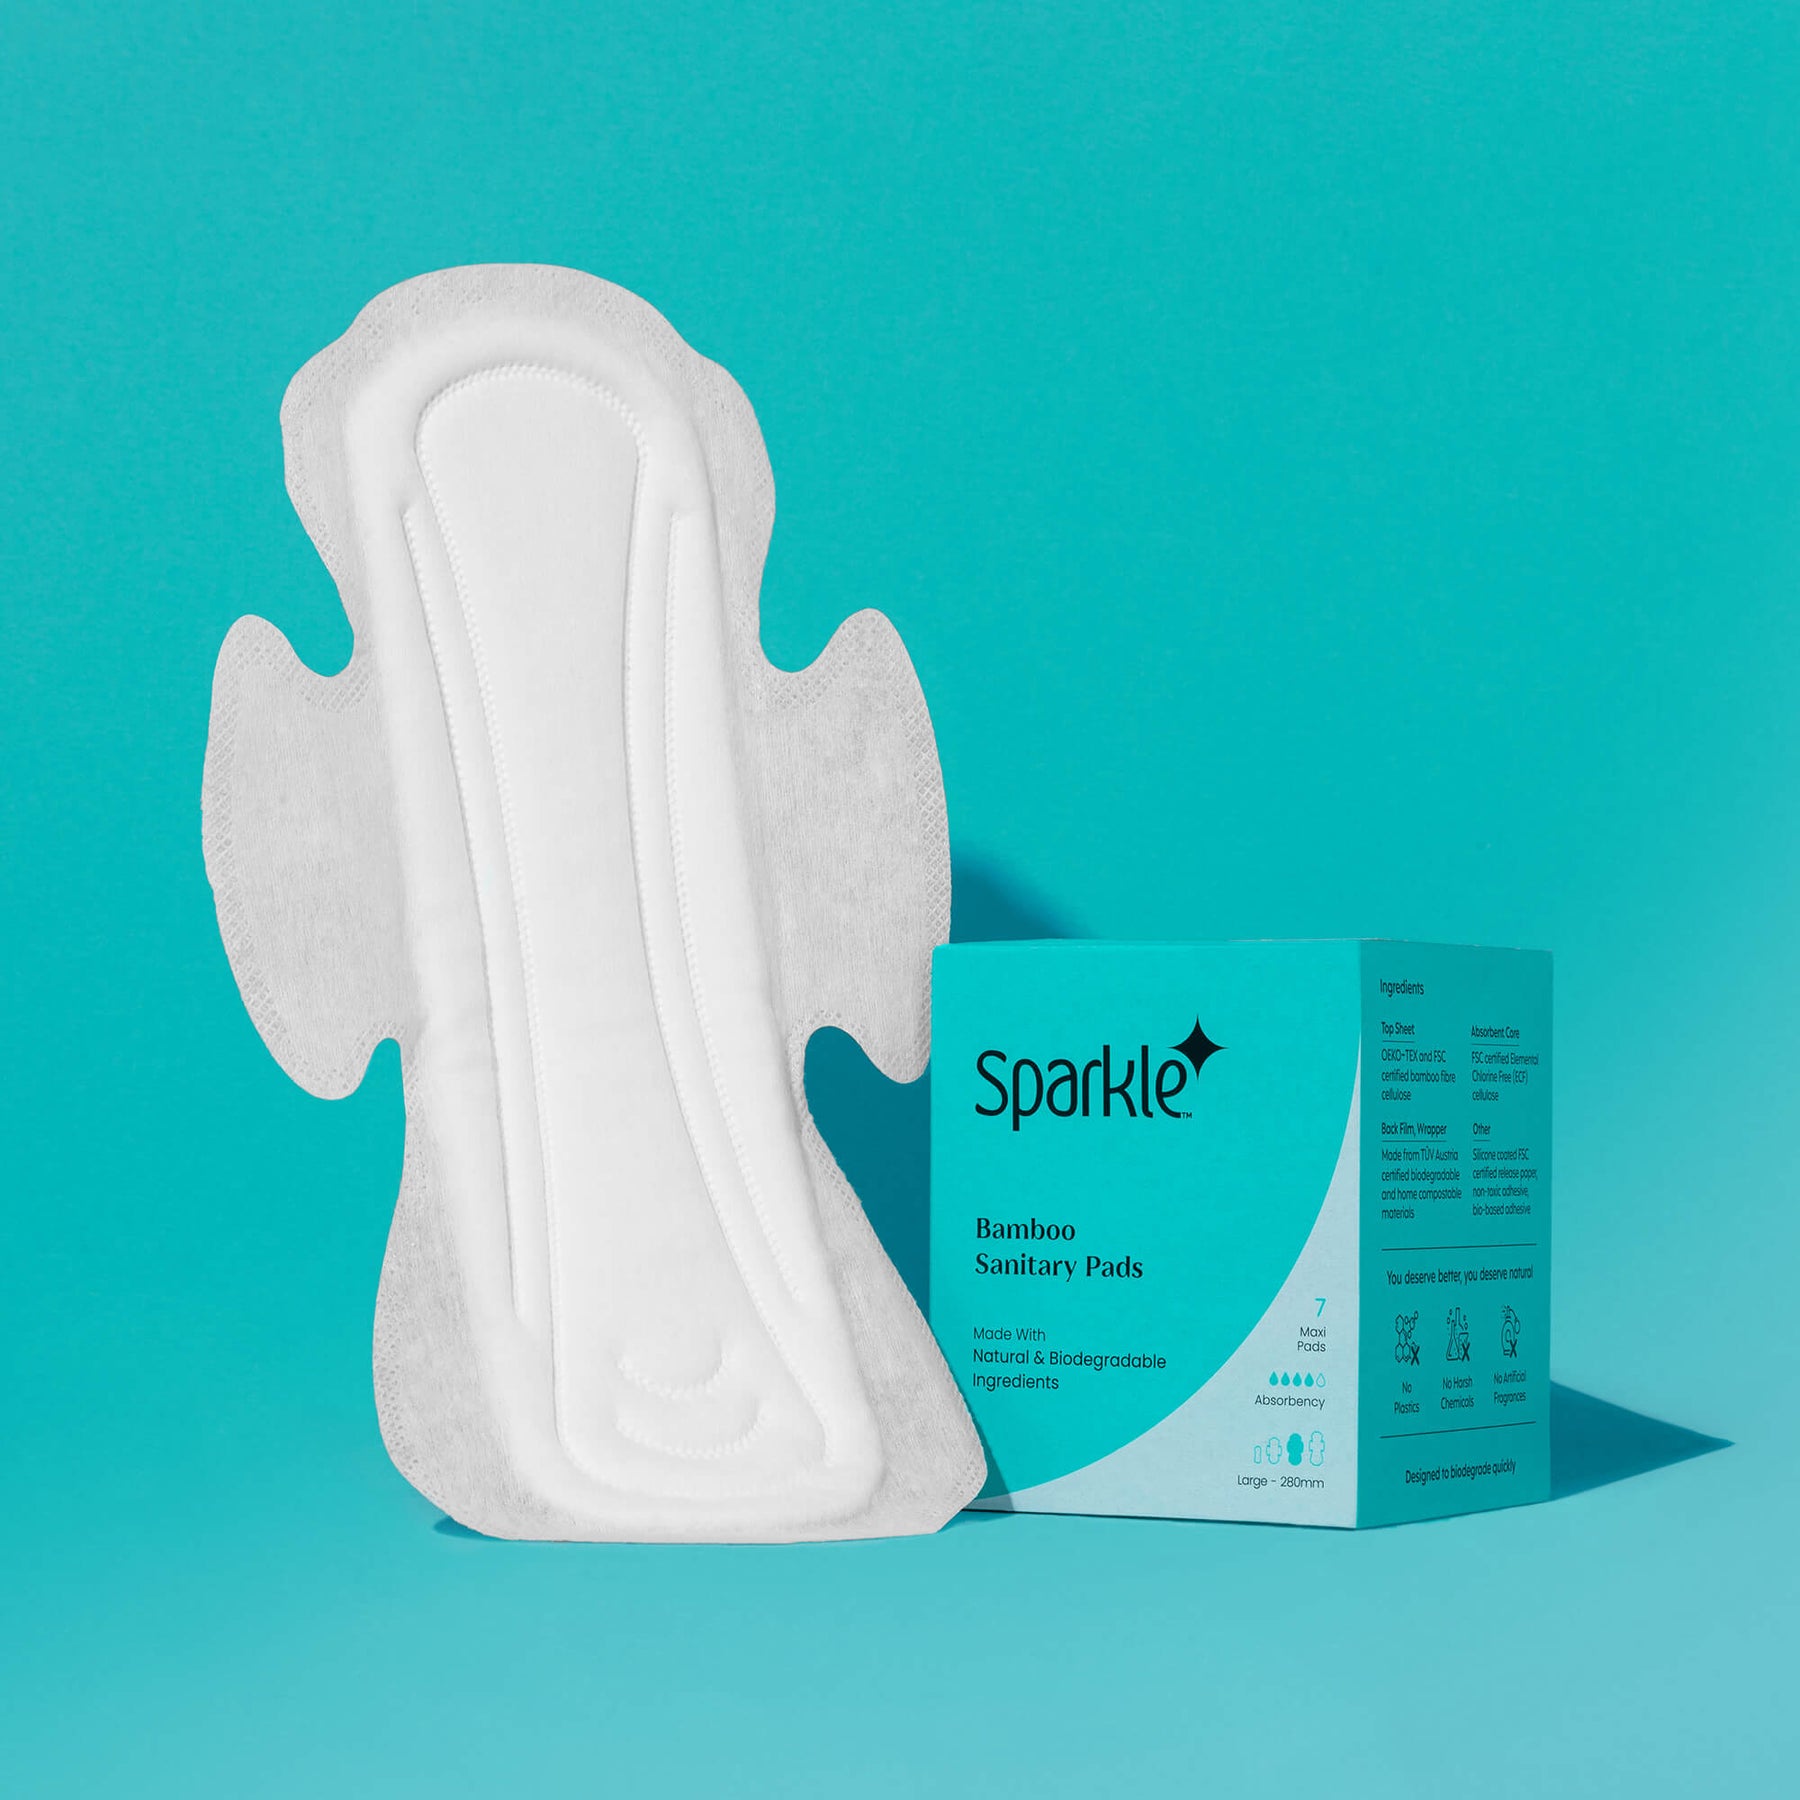 Sparkle  Bamboo Sanitary Pads